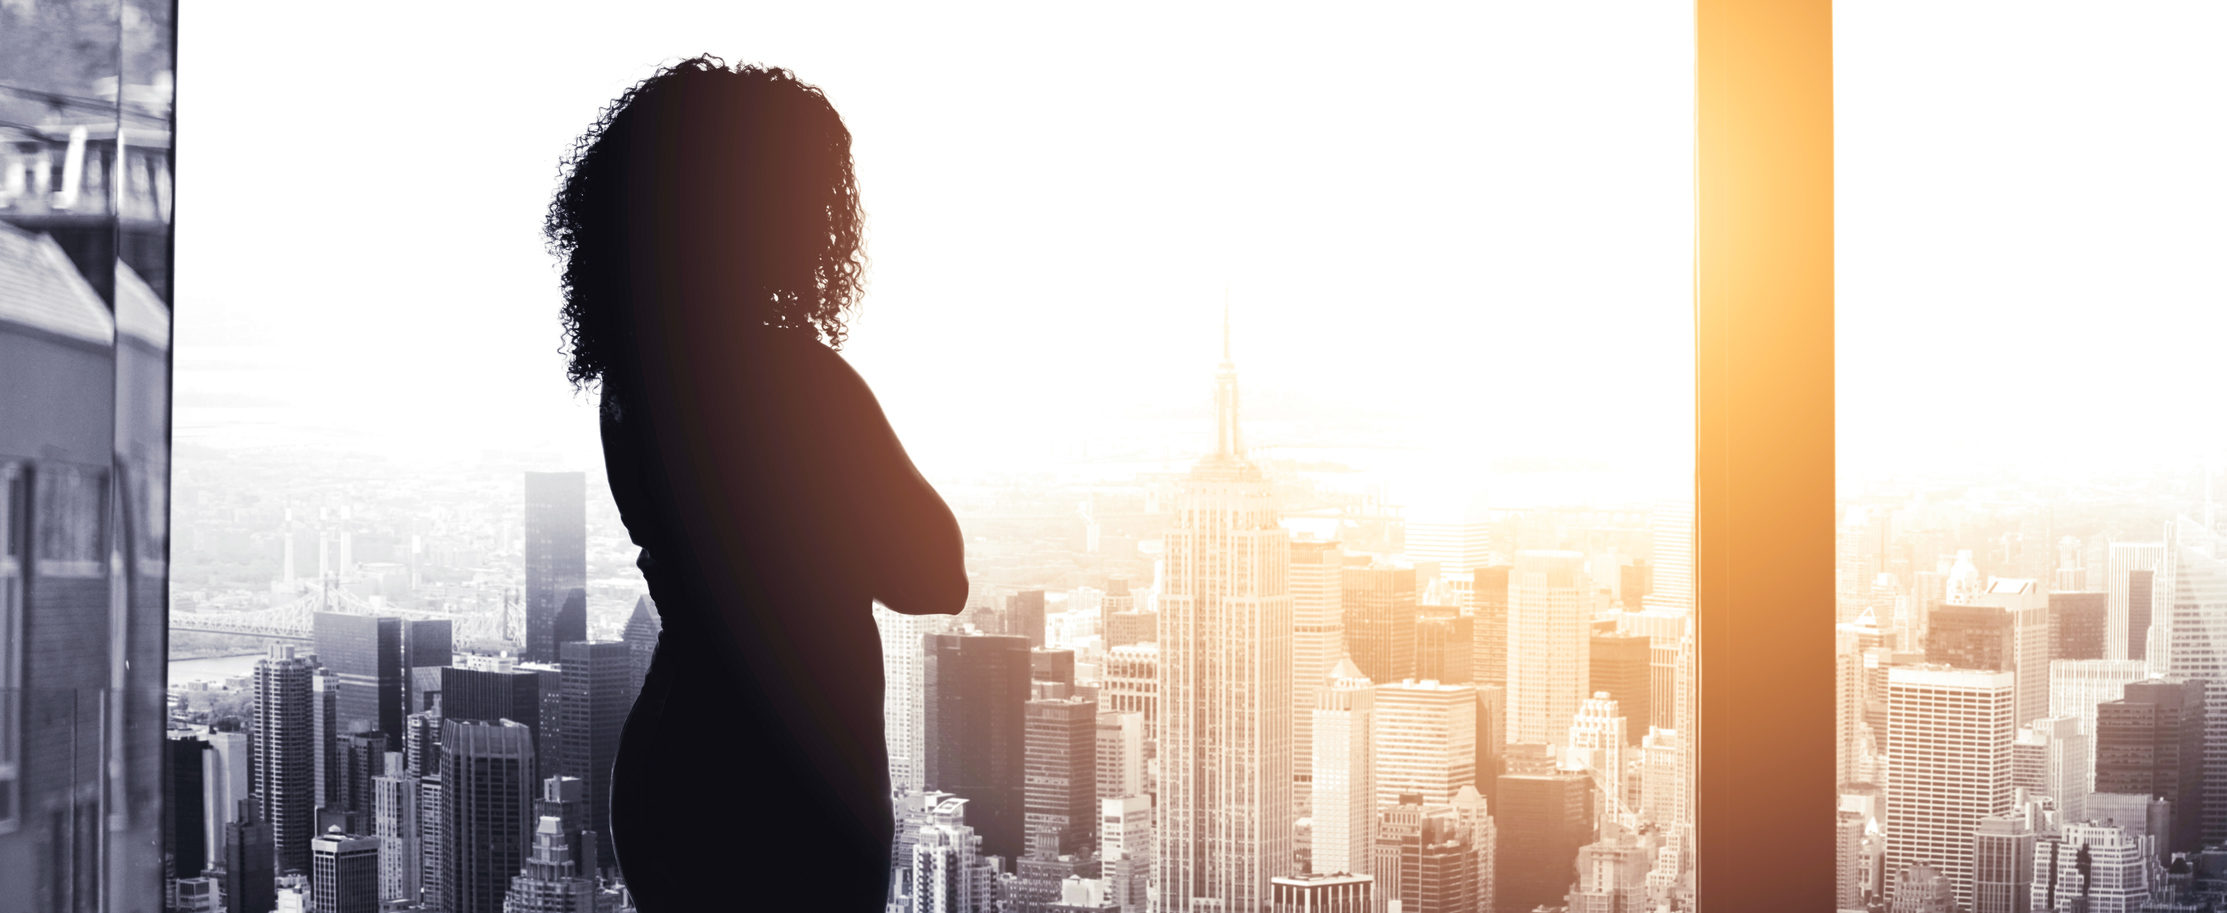 Silhouetted shot of a young businesswoman looking at a cityscape from an office window